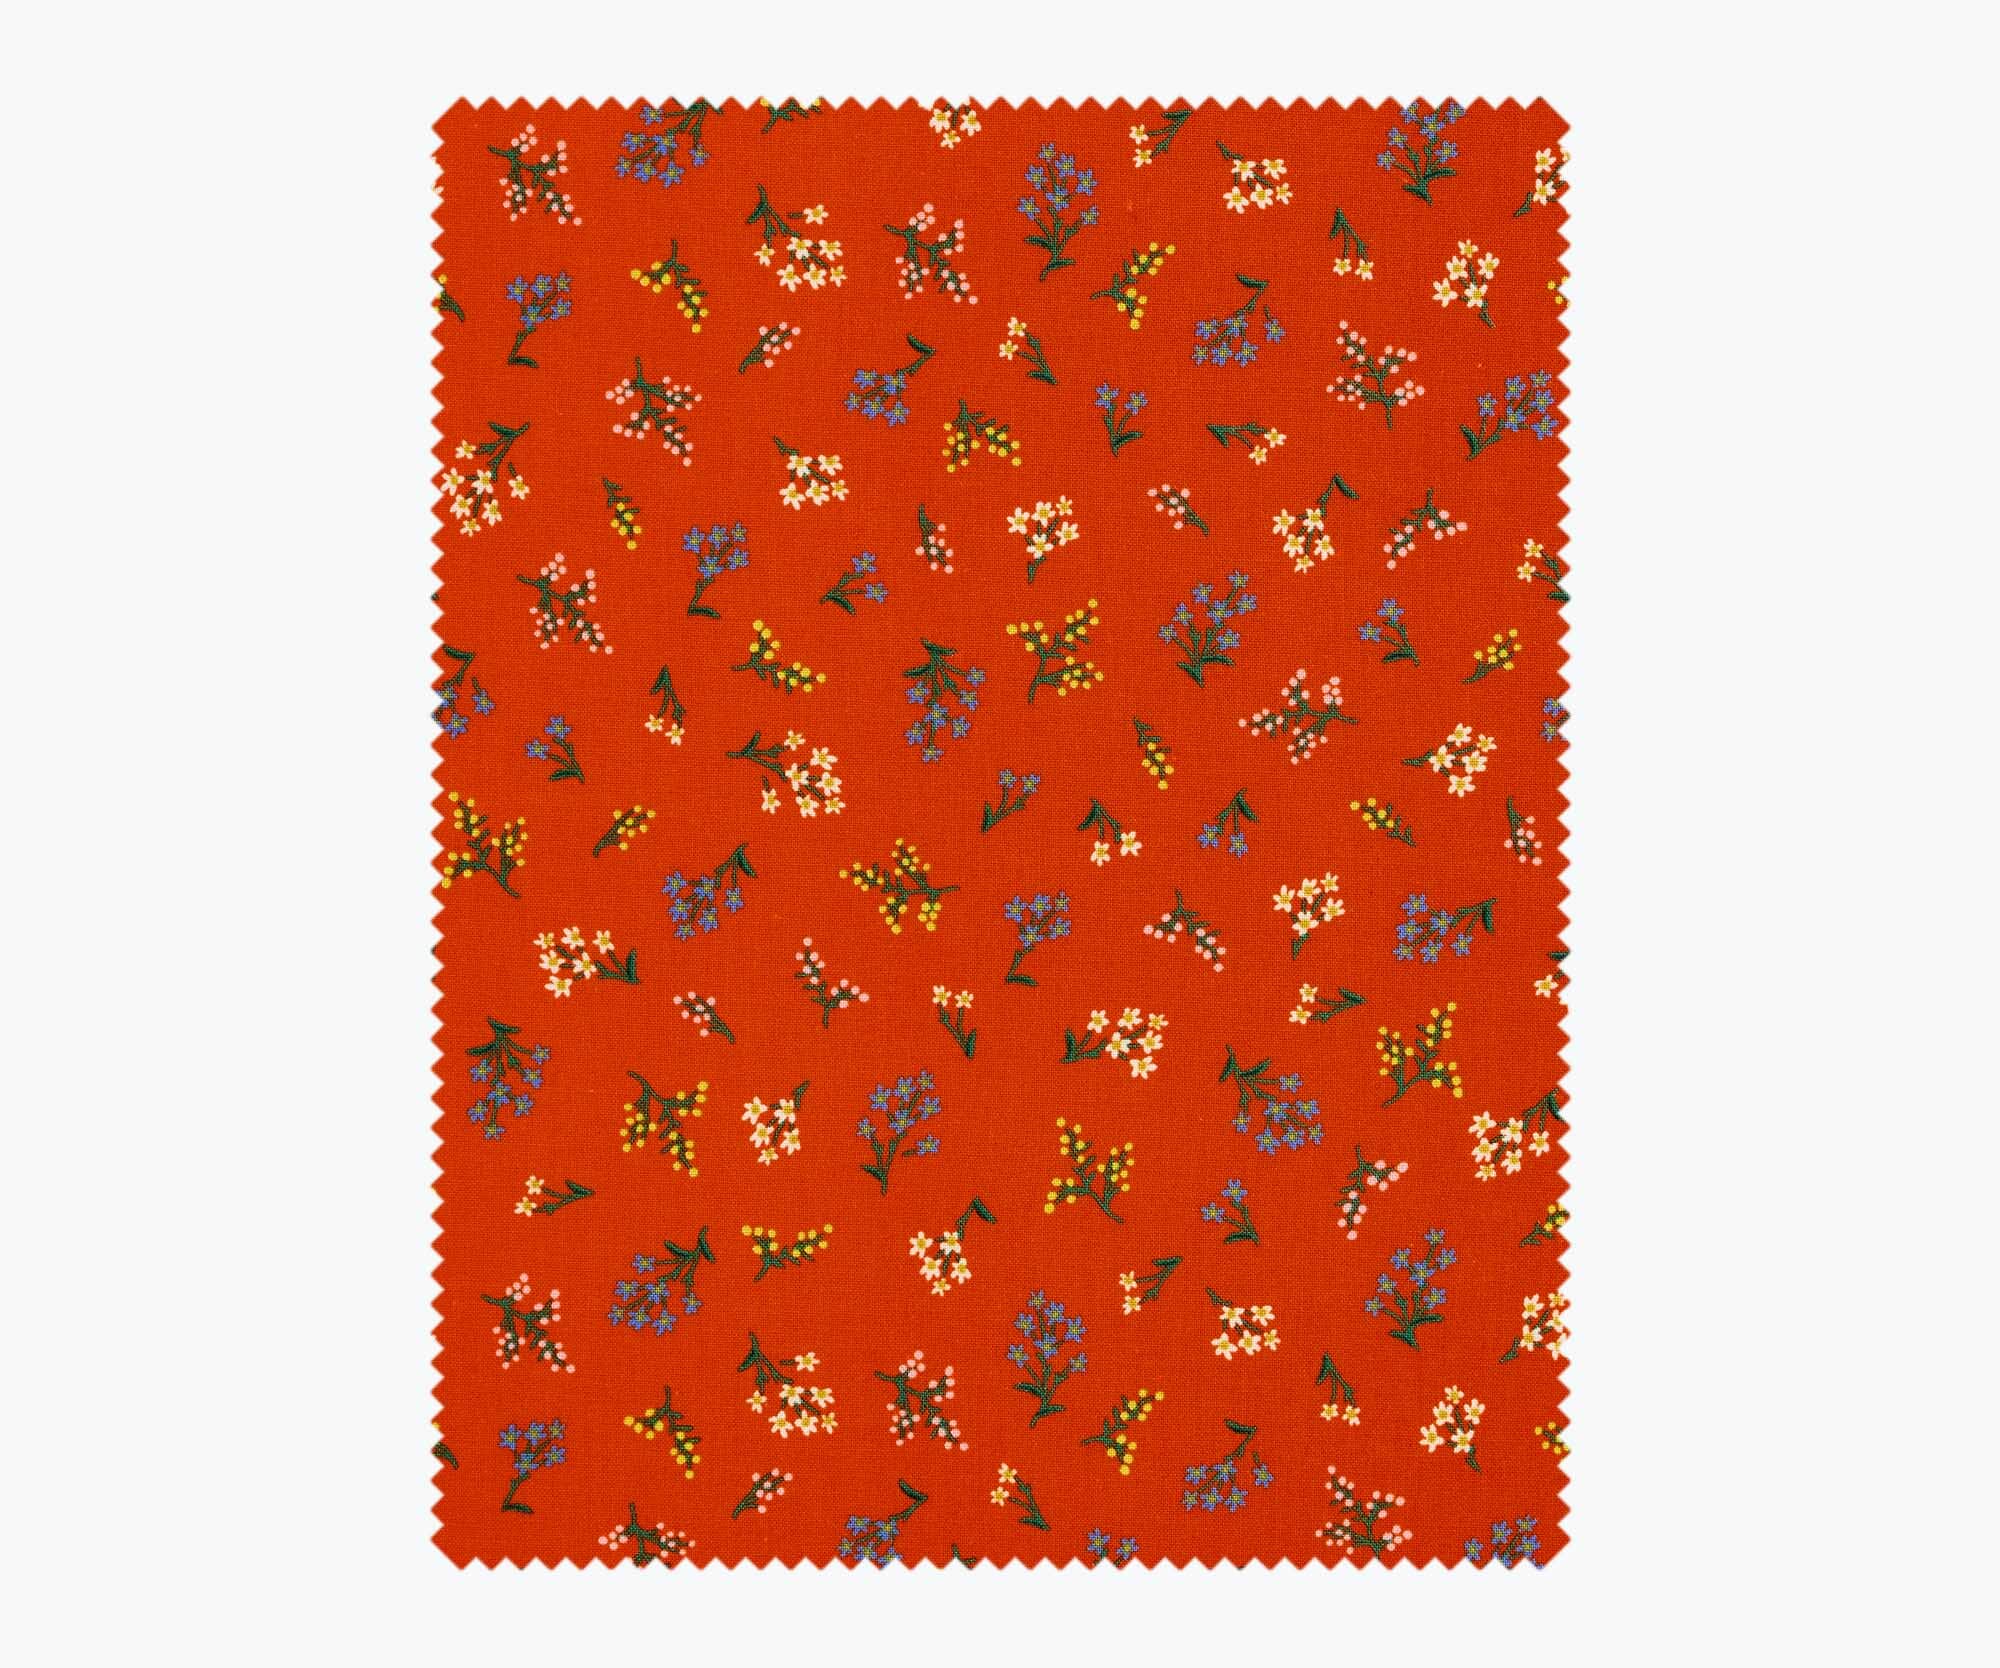 Rifle Paper Co - Petites Fleurs Red Cotton from Strawberry Fields